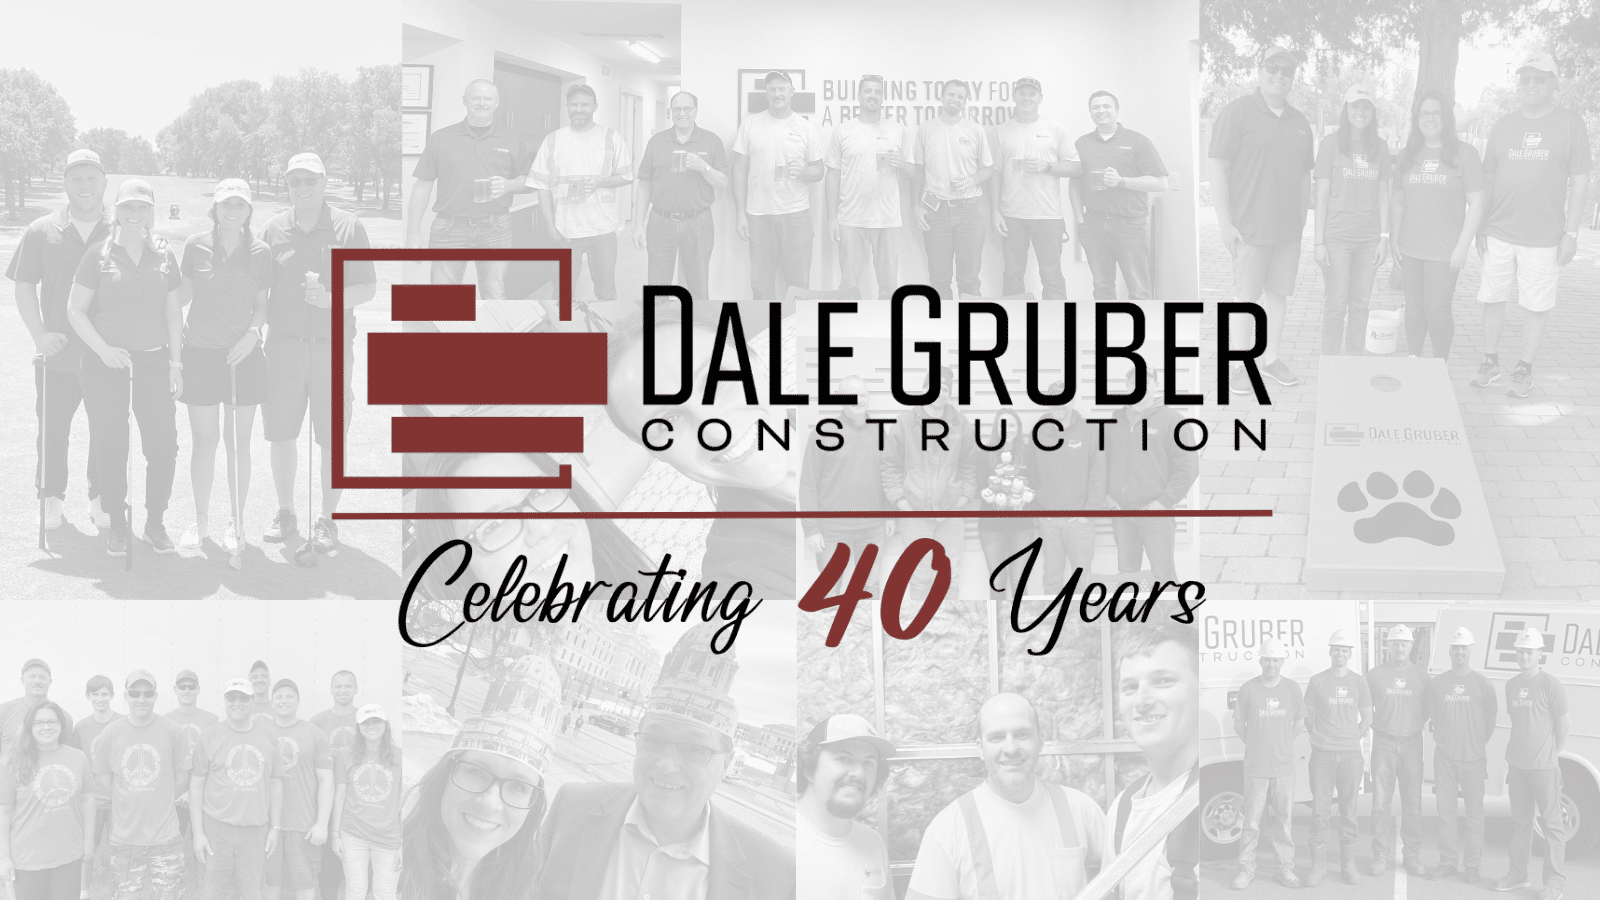 Dale Gruber Construction Celebrates 40 Years!